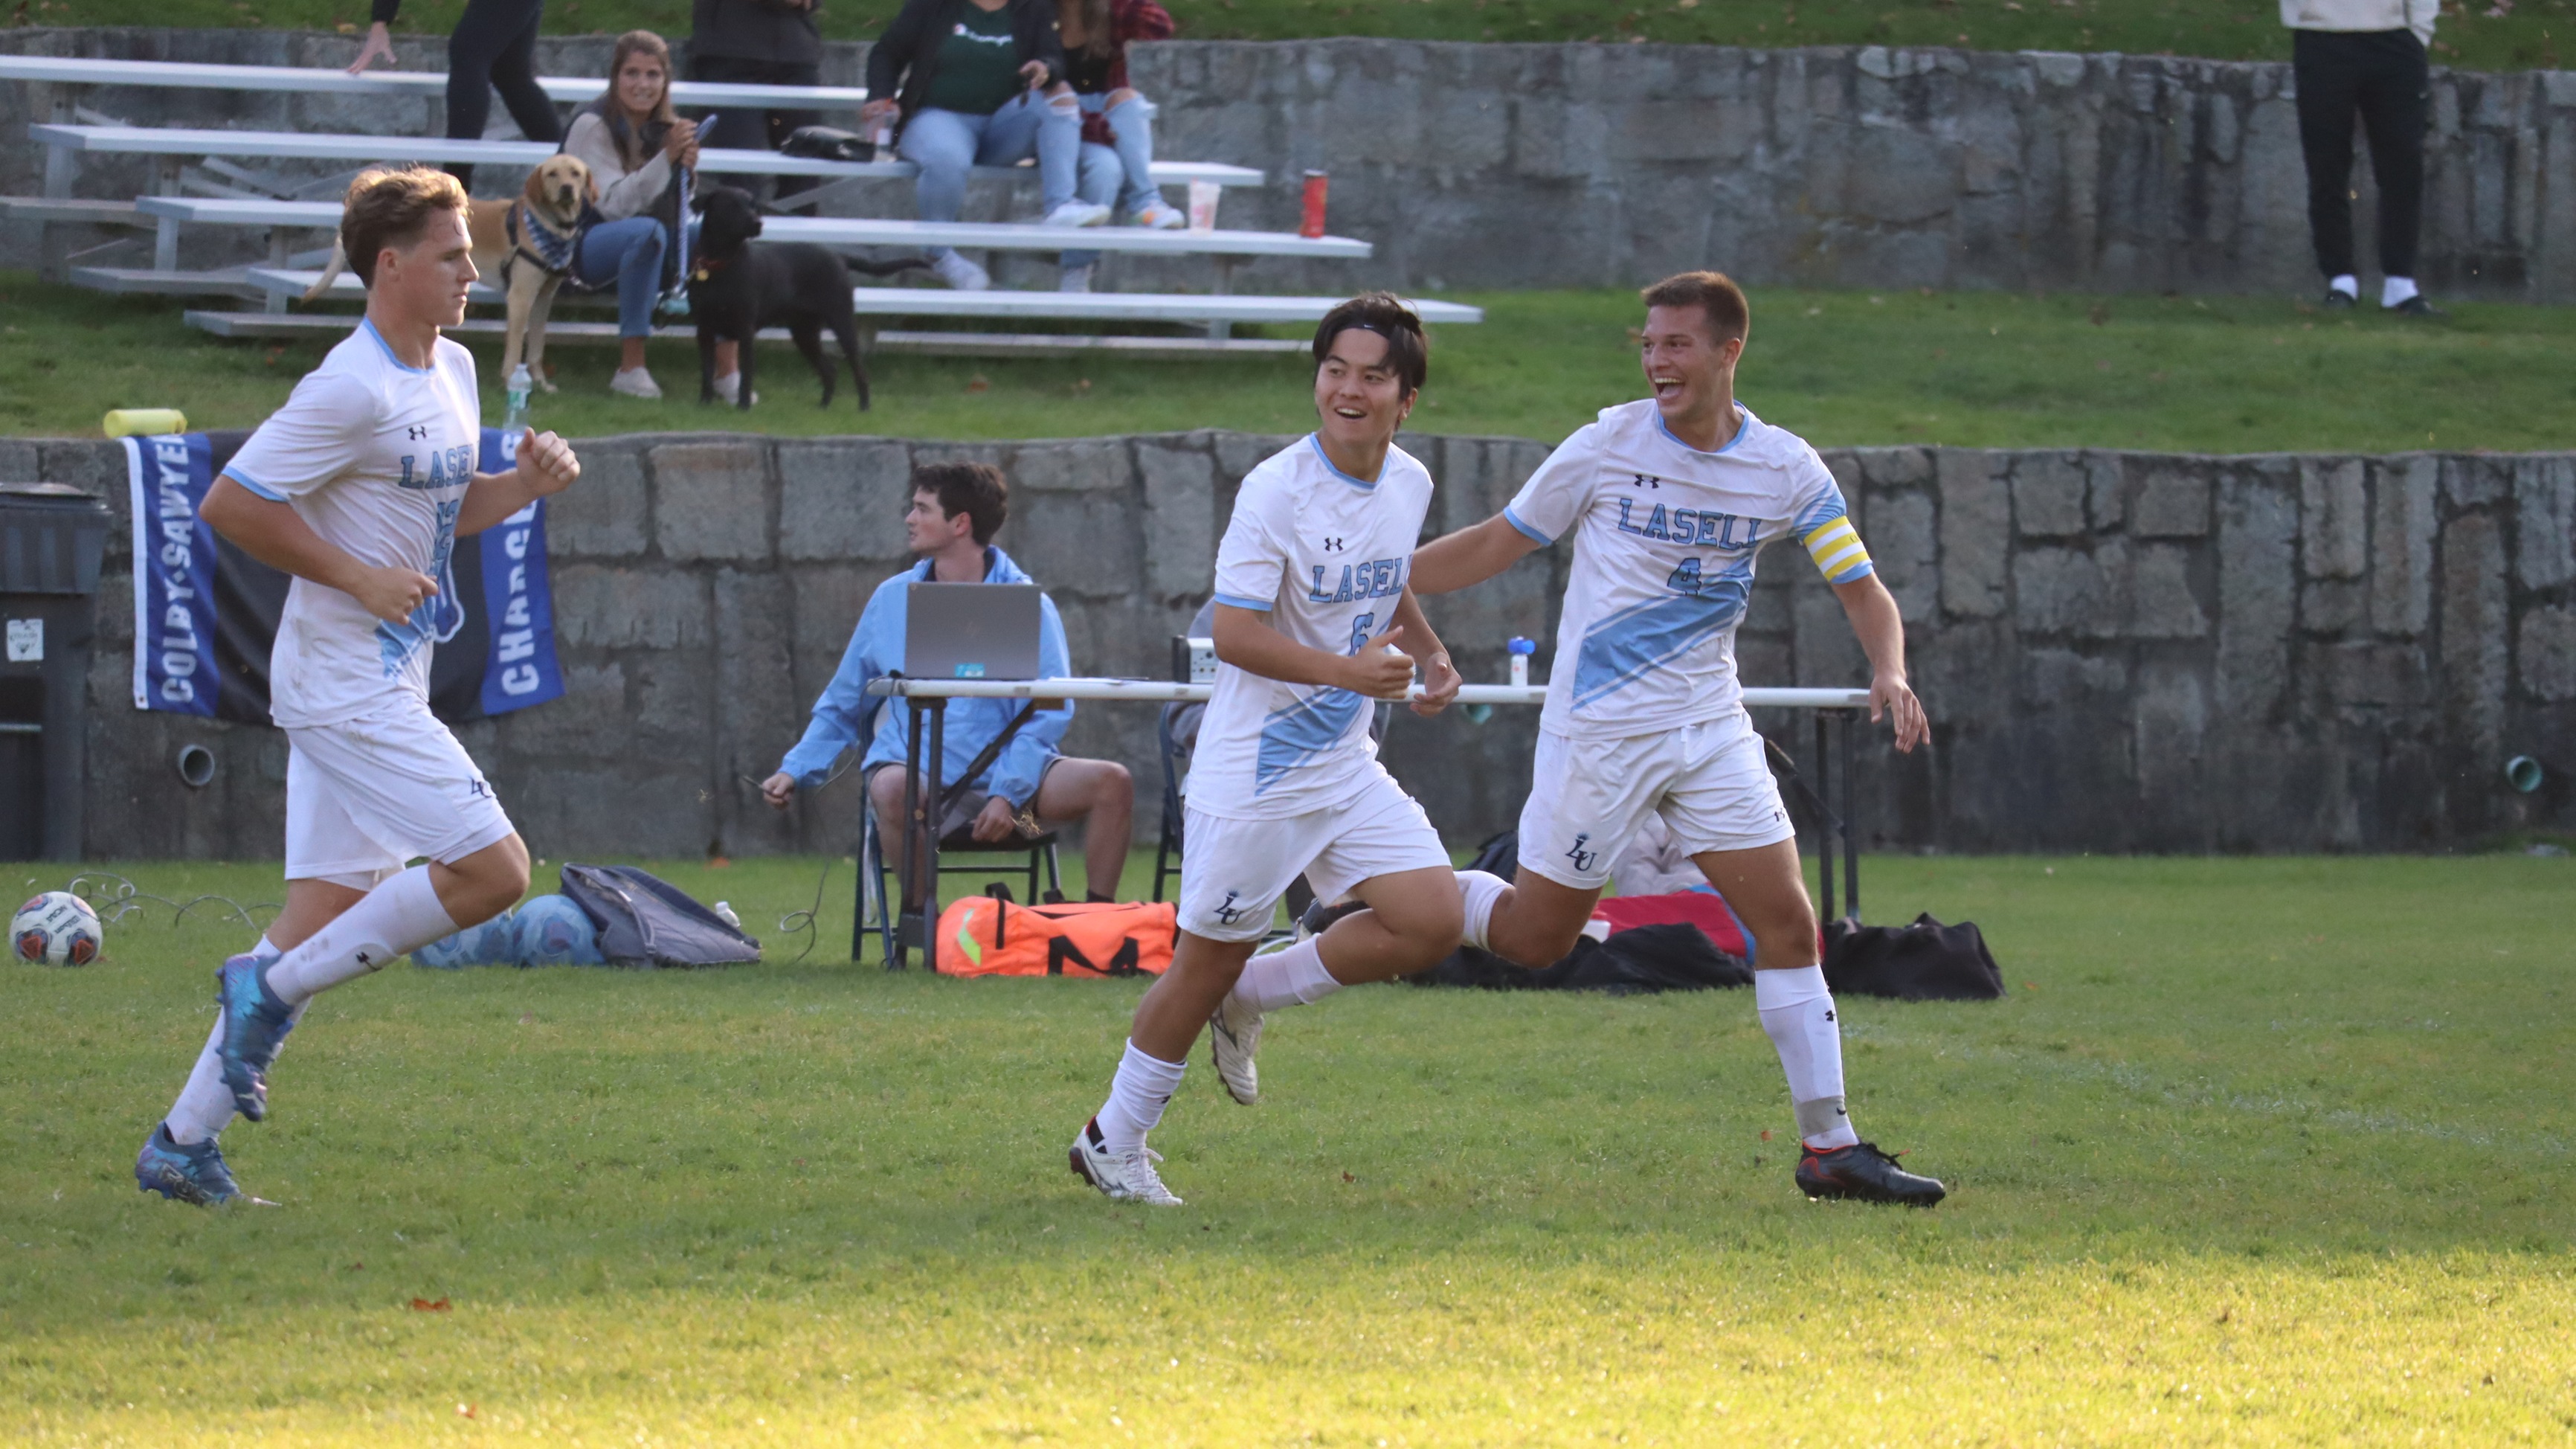 MSOC: Two late second-half goals lift Lasell over Colby-Sawyer to clinch playoff berth